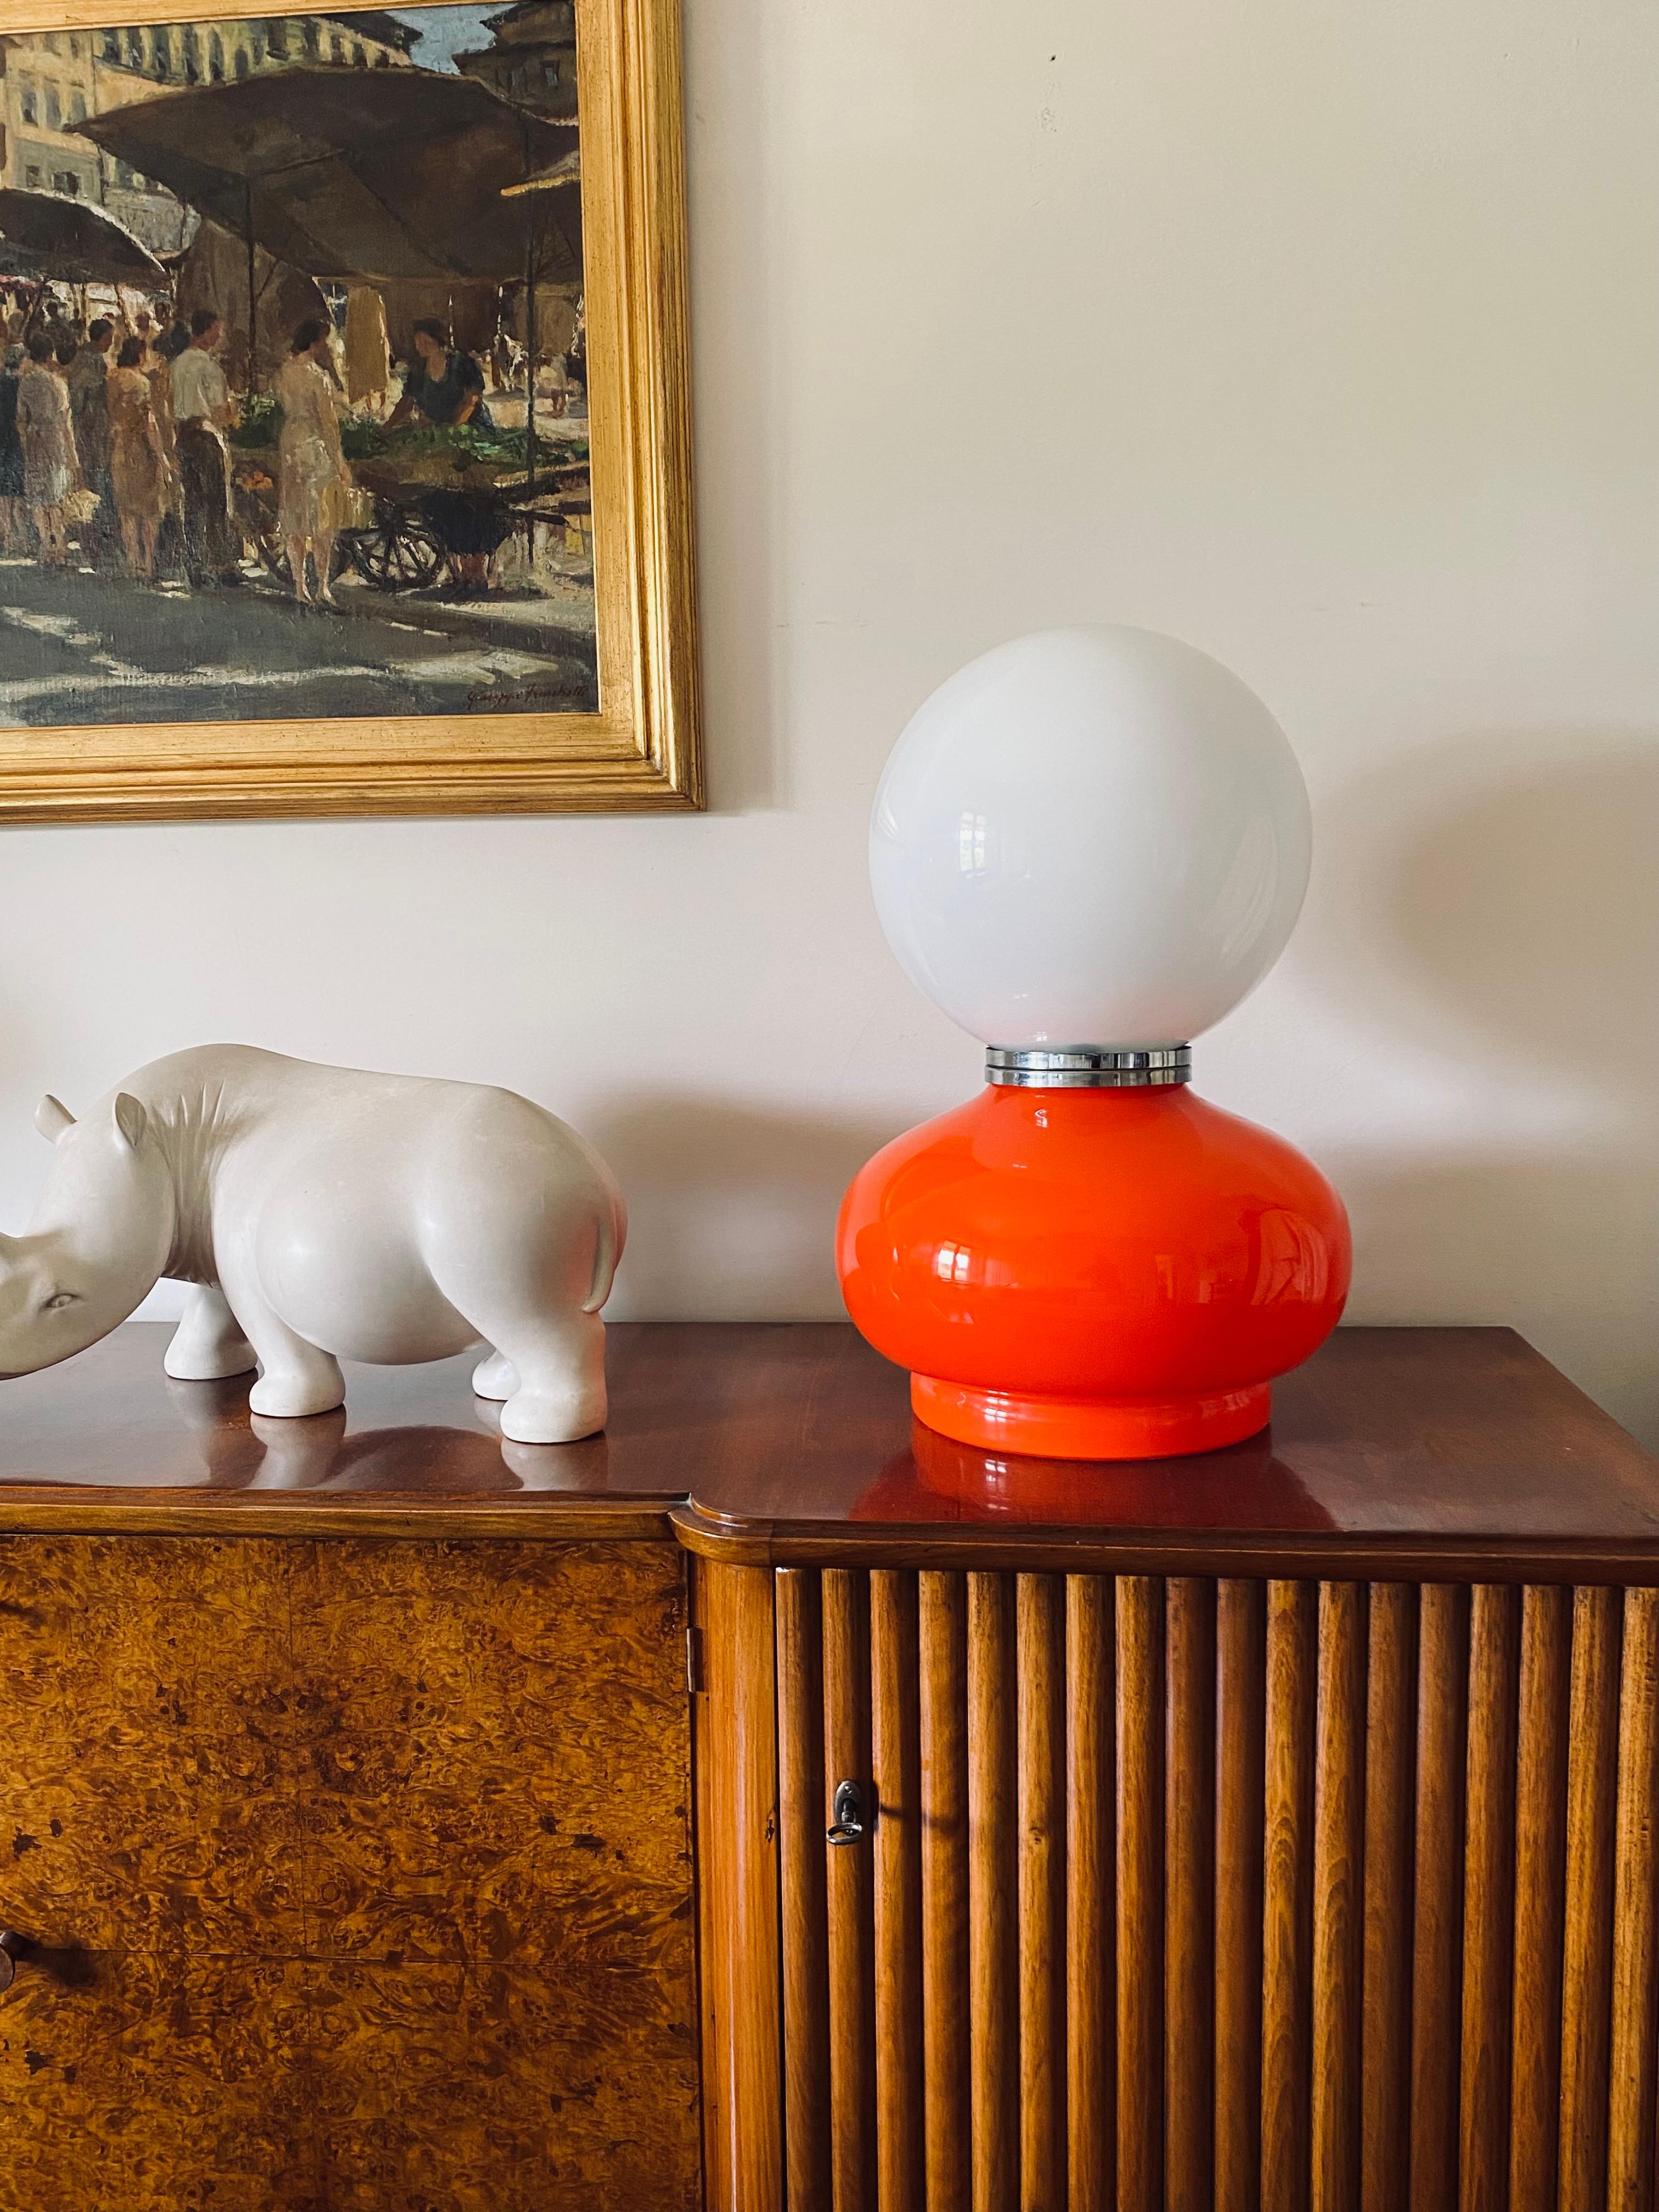 Space Age Murano glass table lamp.

Designed by Carlo Nason, AV Mazzega, Italy 1970s

Opaline half white glass and red glass. Chromed aluminum. Two bulbs, one lights the white sphere the other the orange base.

56 cm H - 40 cm